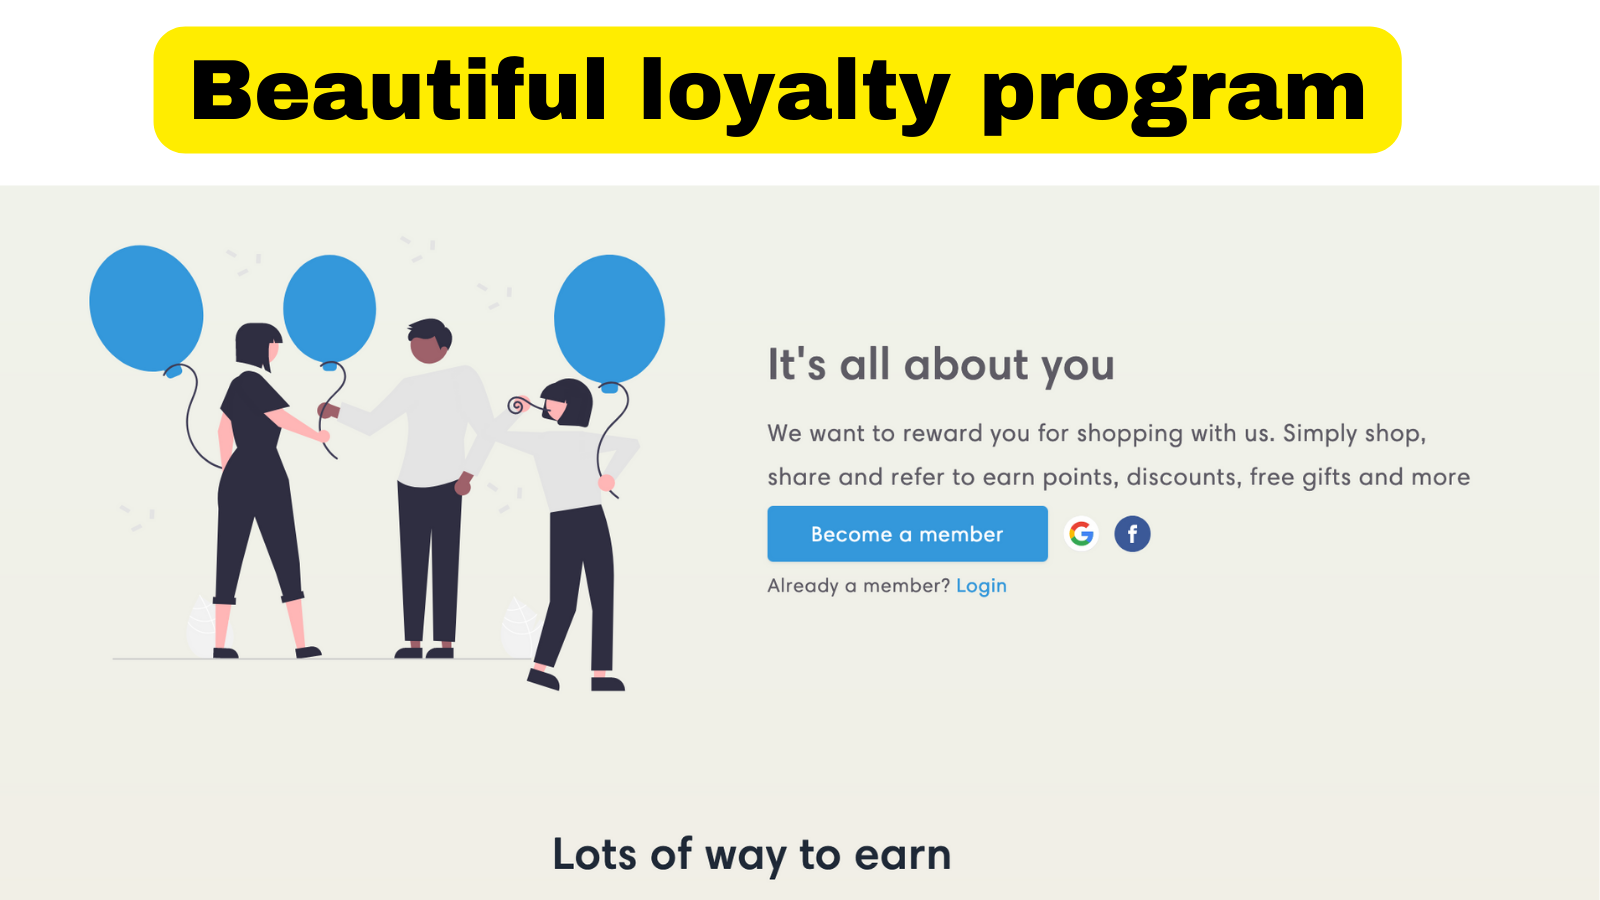 Beautifully crafted loyalty program pages